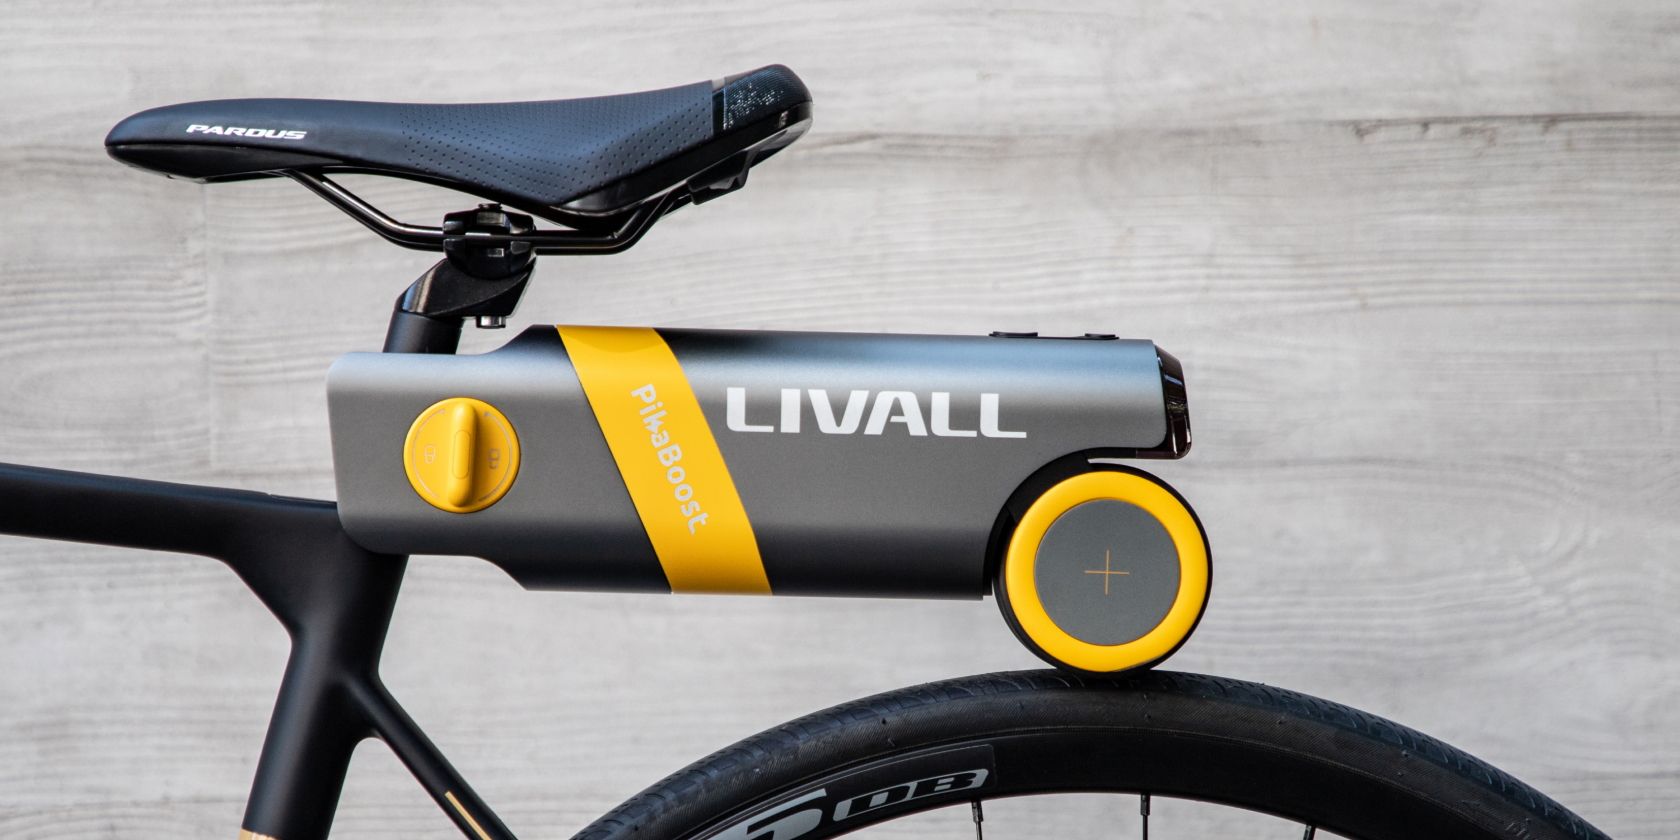 A Photo of the LIVALL PikaBoost Mounted to a Bike